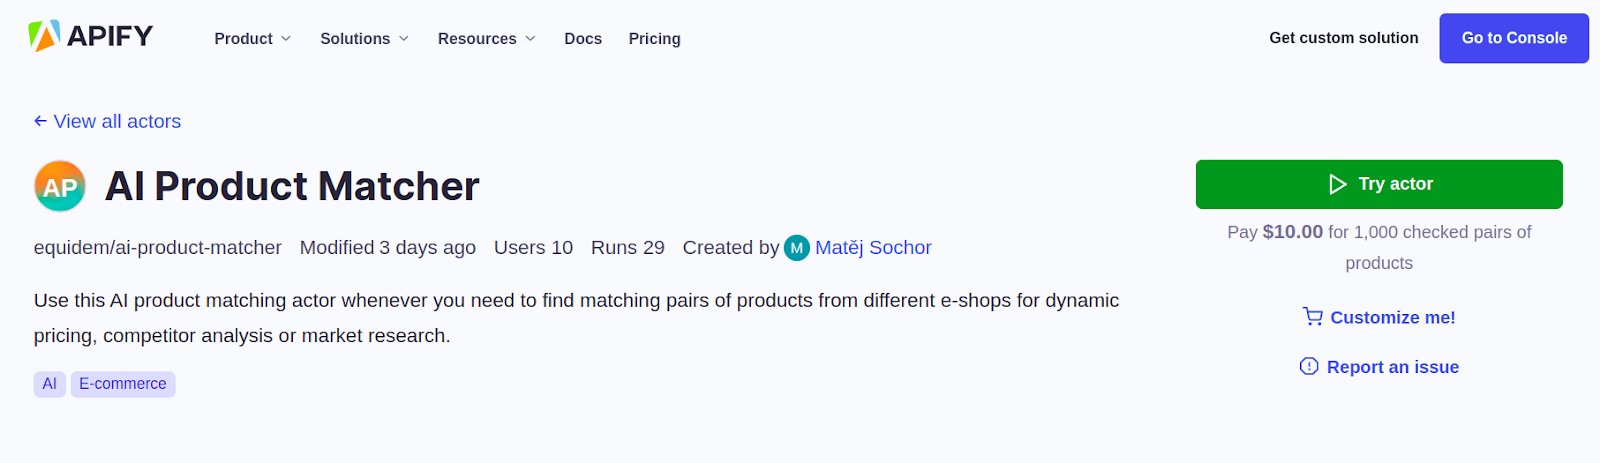 Step 1. Find the AI Product Matcher in Apify Store 